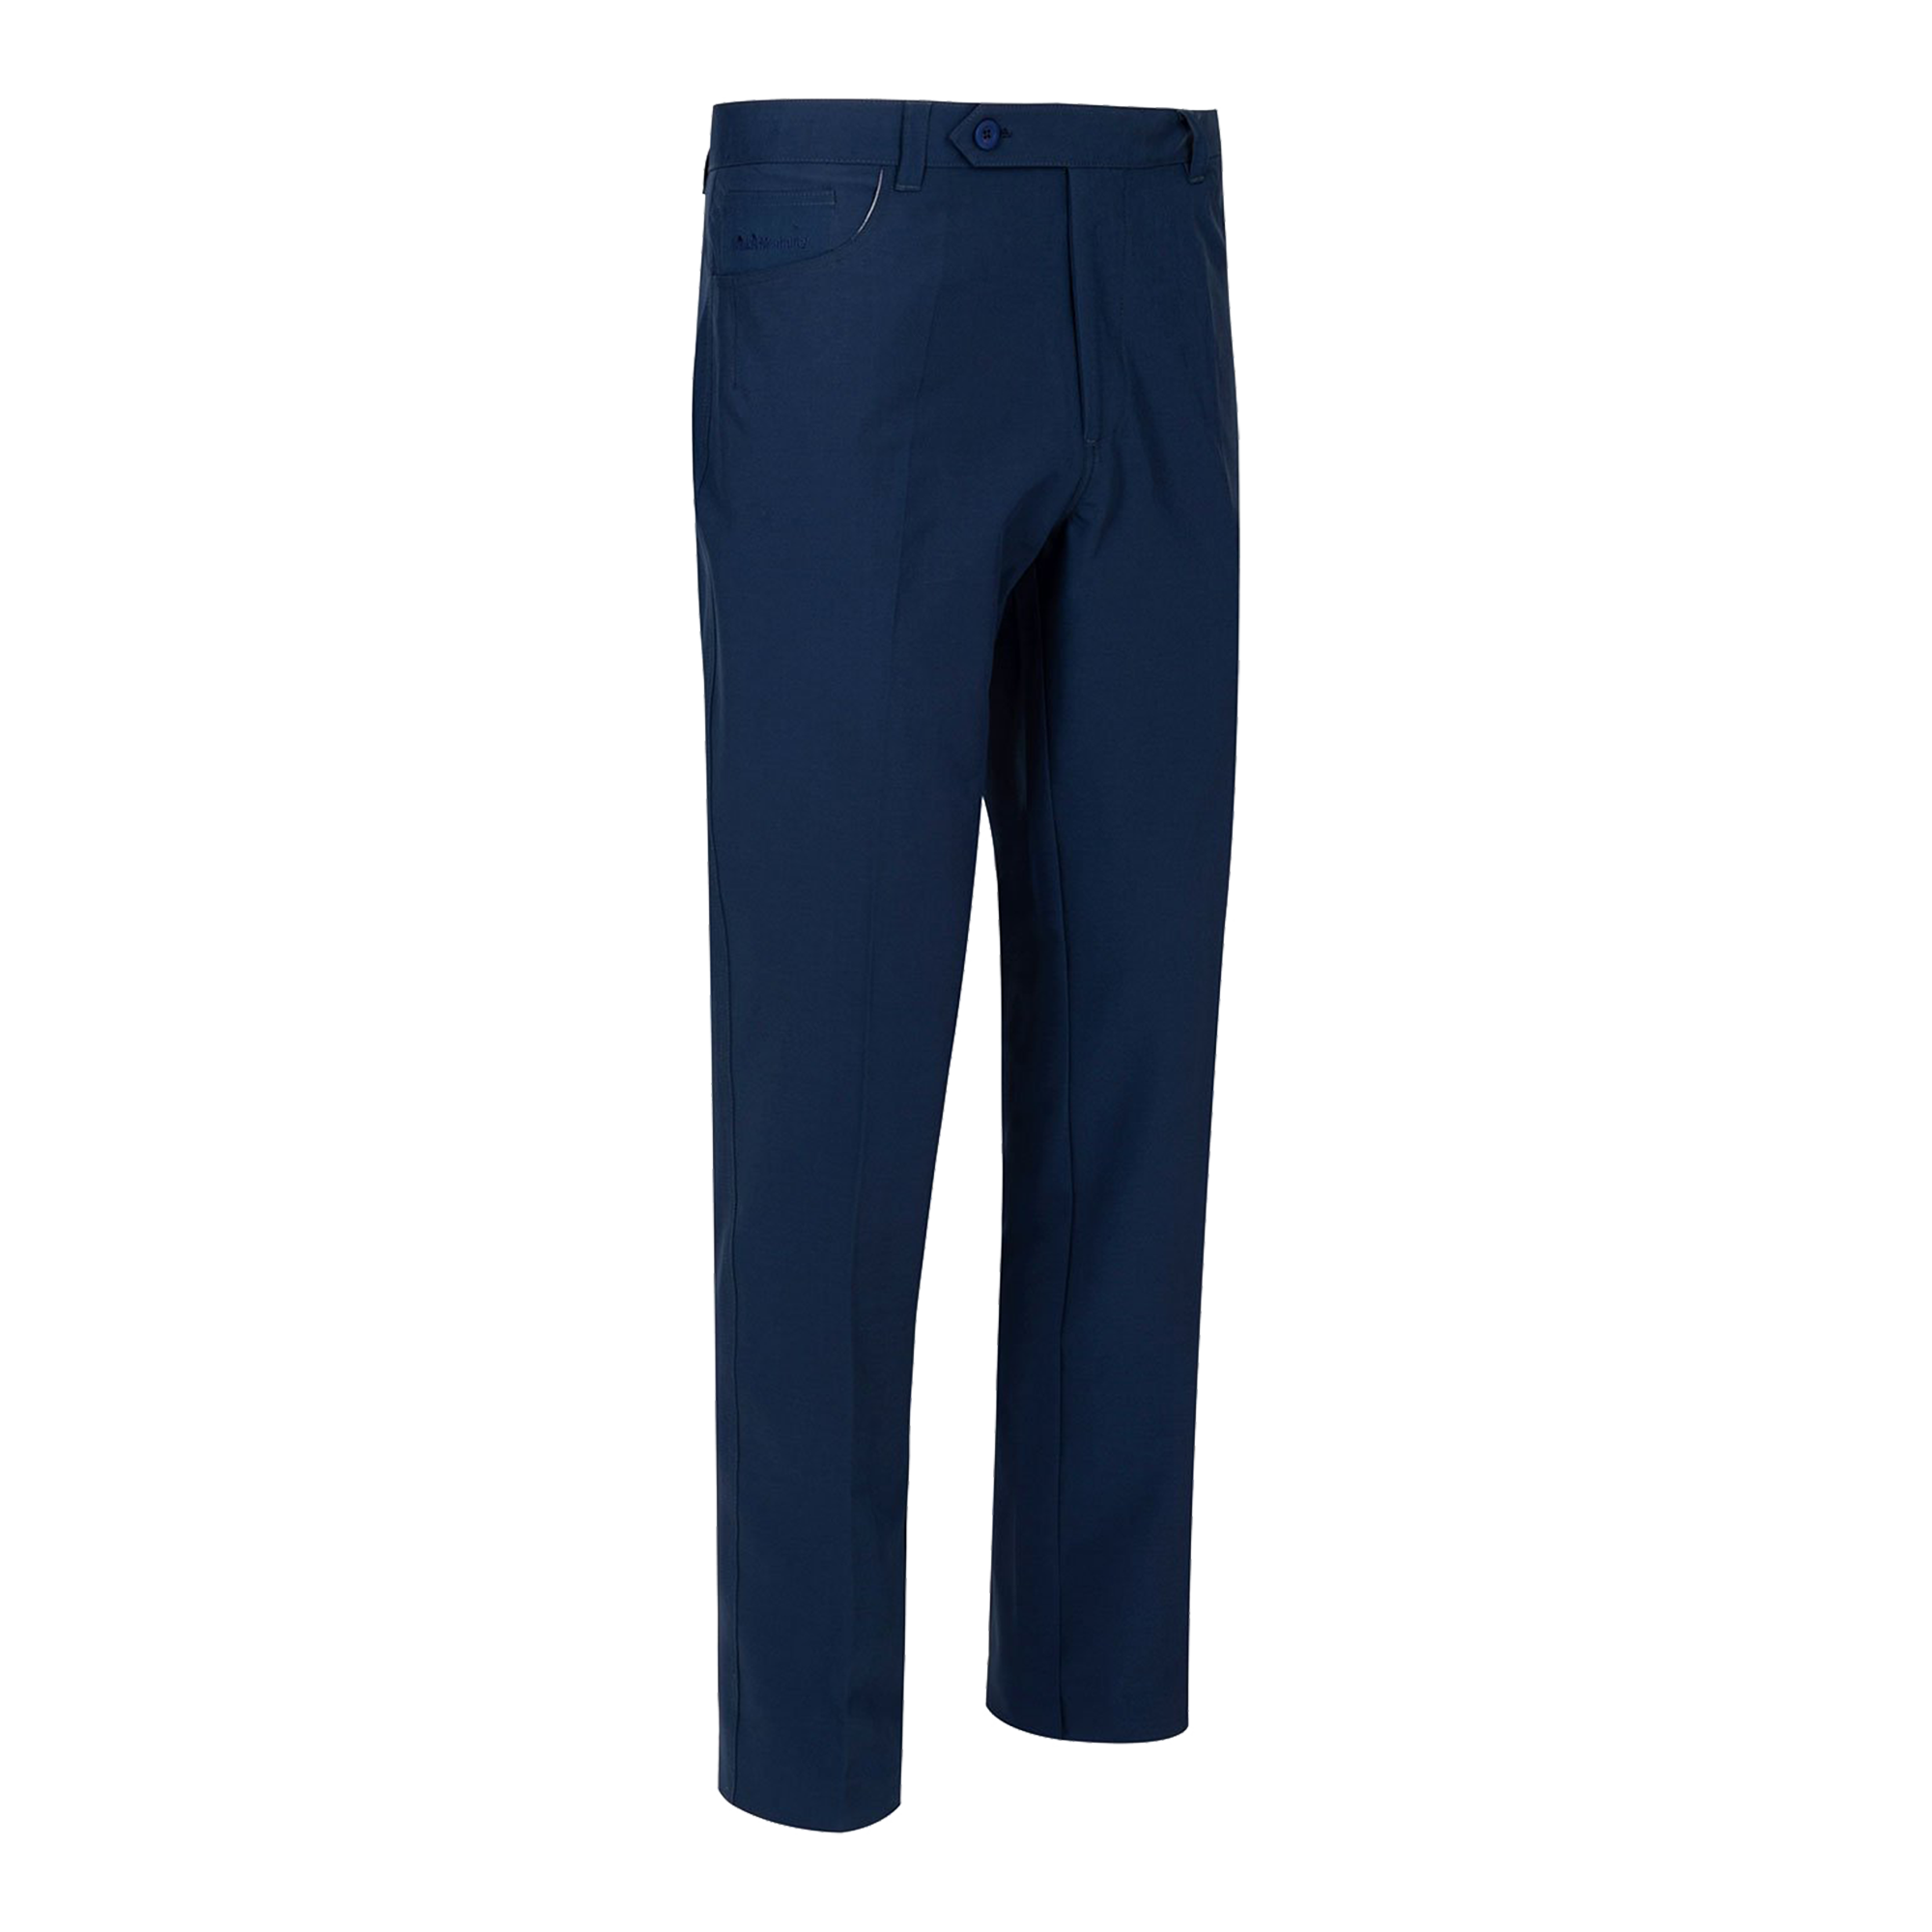 Bunker Mentaity Rox Navy Mens Golf Trousers | Golf Trousers & Pants ...